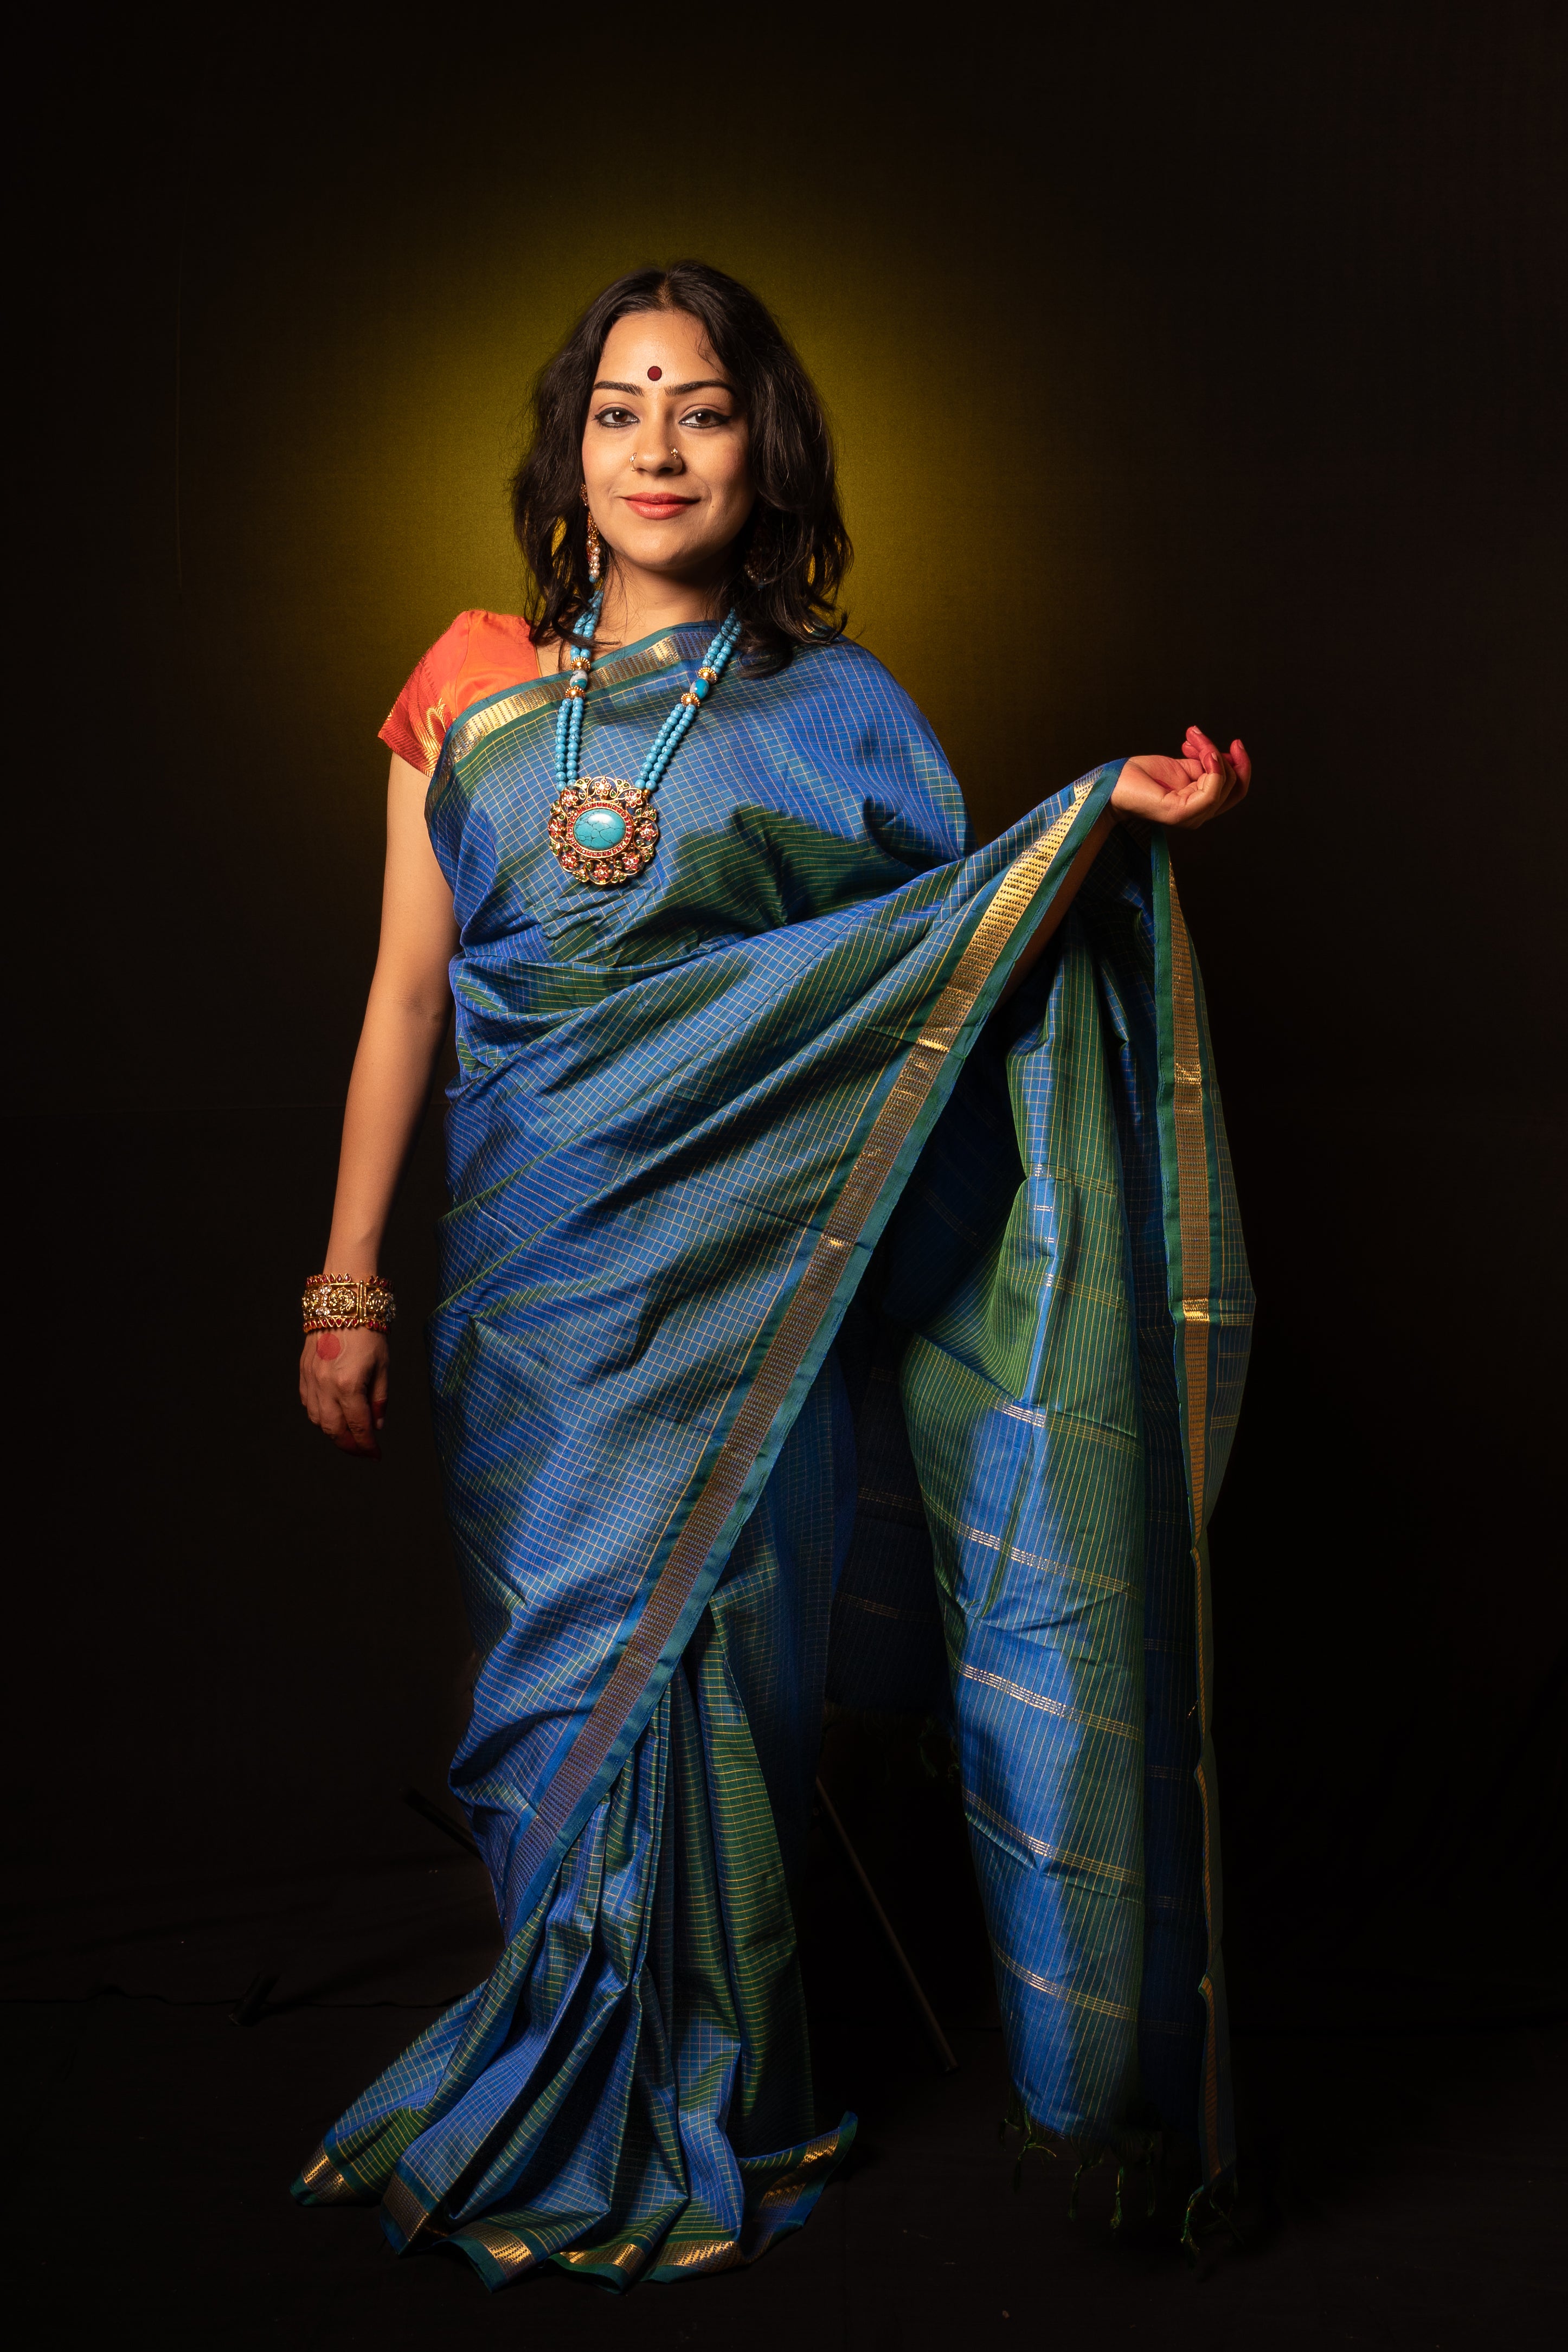 Shop curated handwoven saris, fine artisanal jewellery & accessories